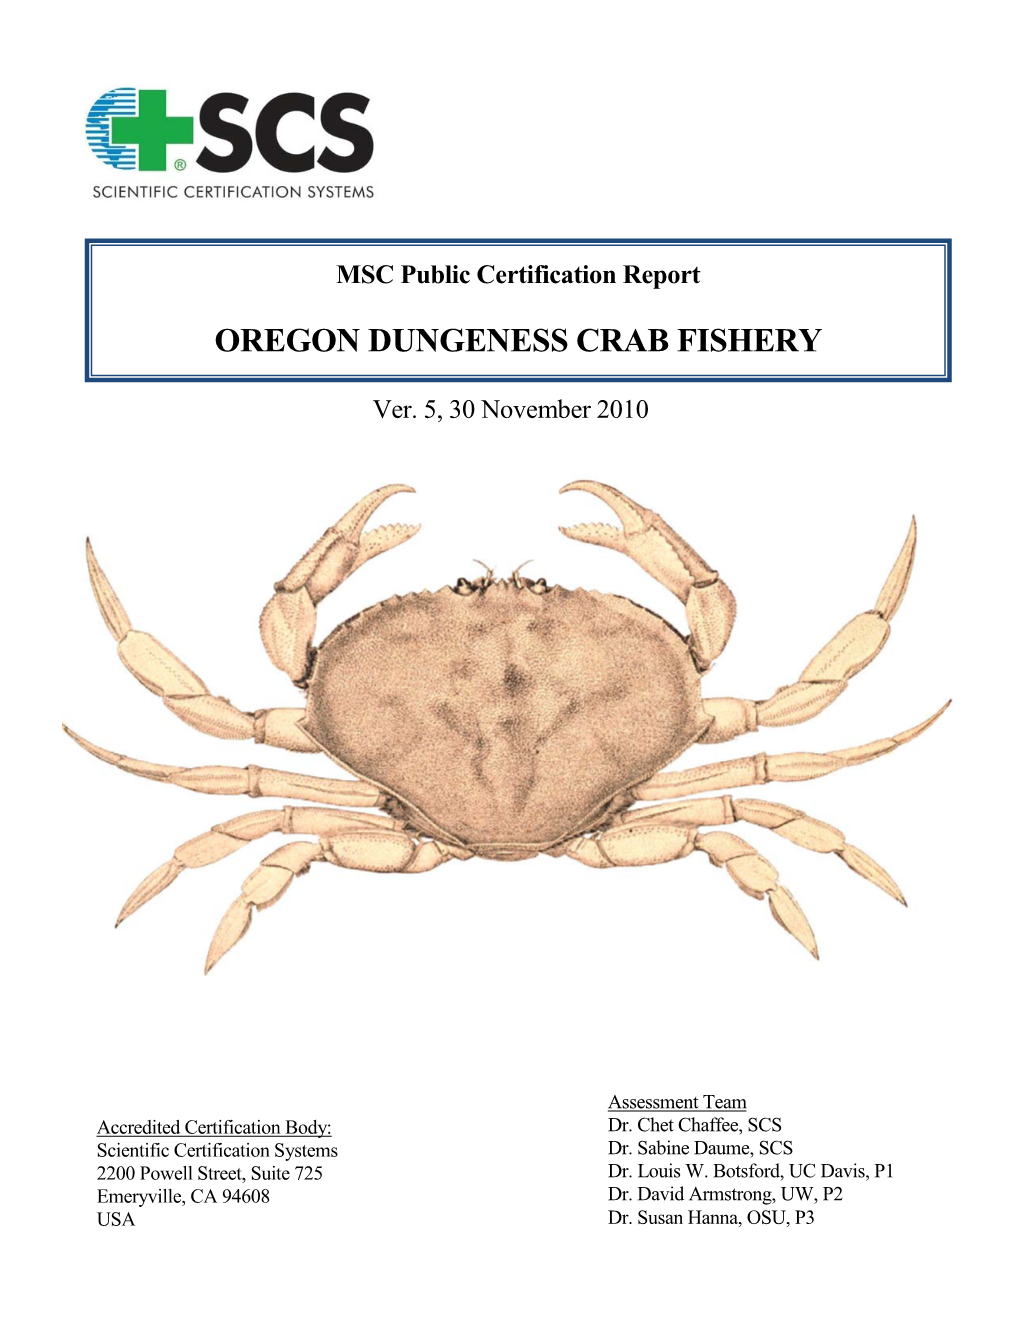 Oregon Dungeness Crab Fishery